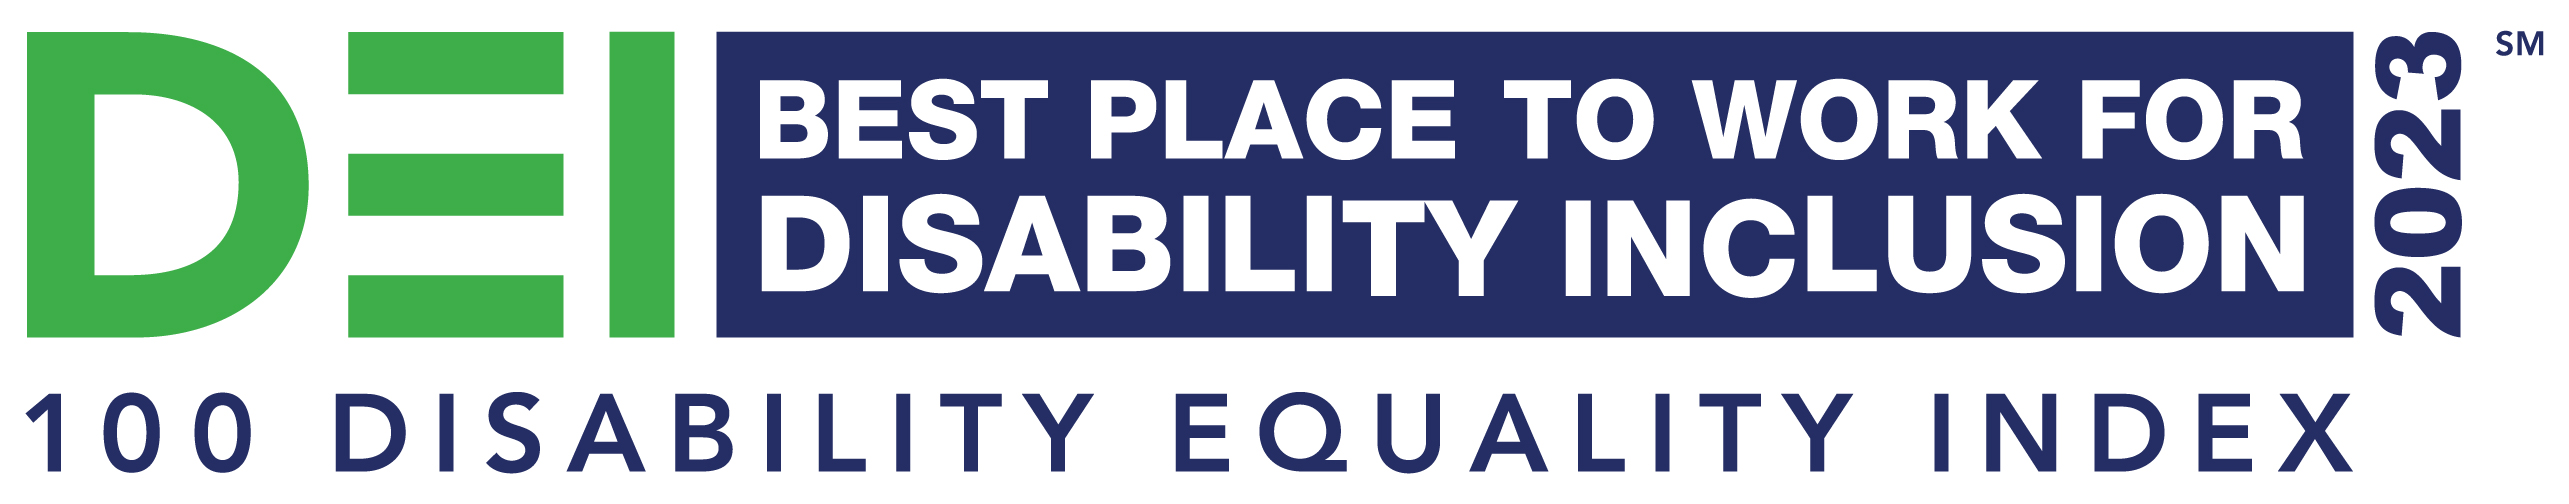 One of the Disability Equality Index's Best places to work for disability inclusion